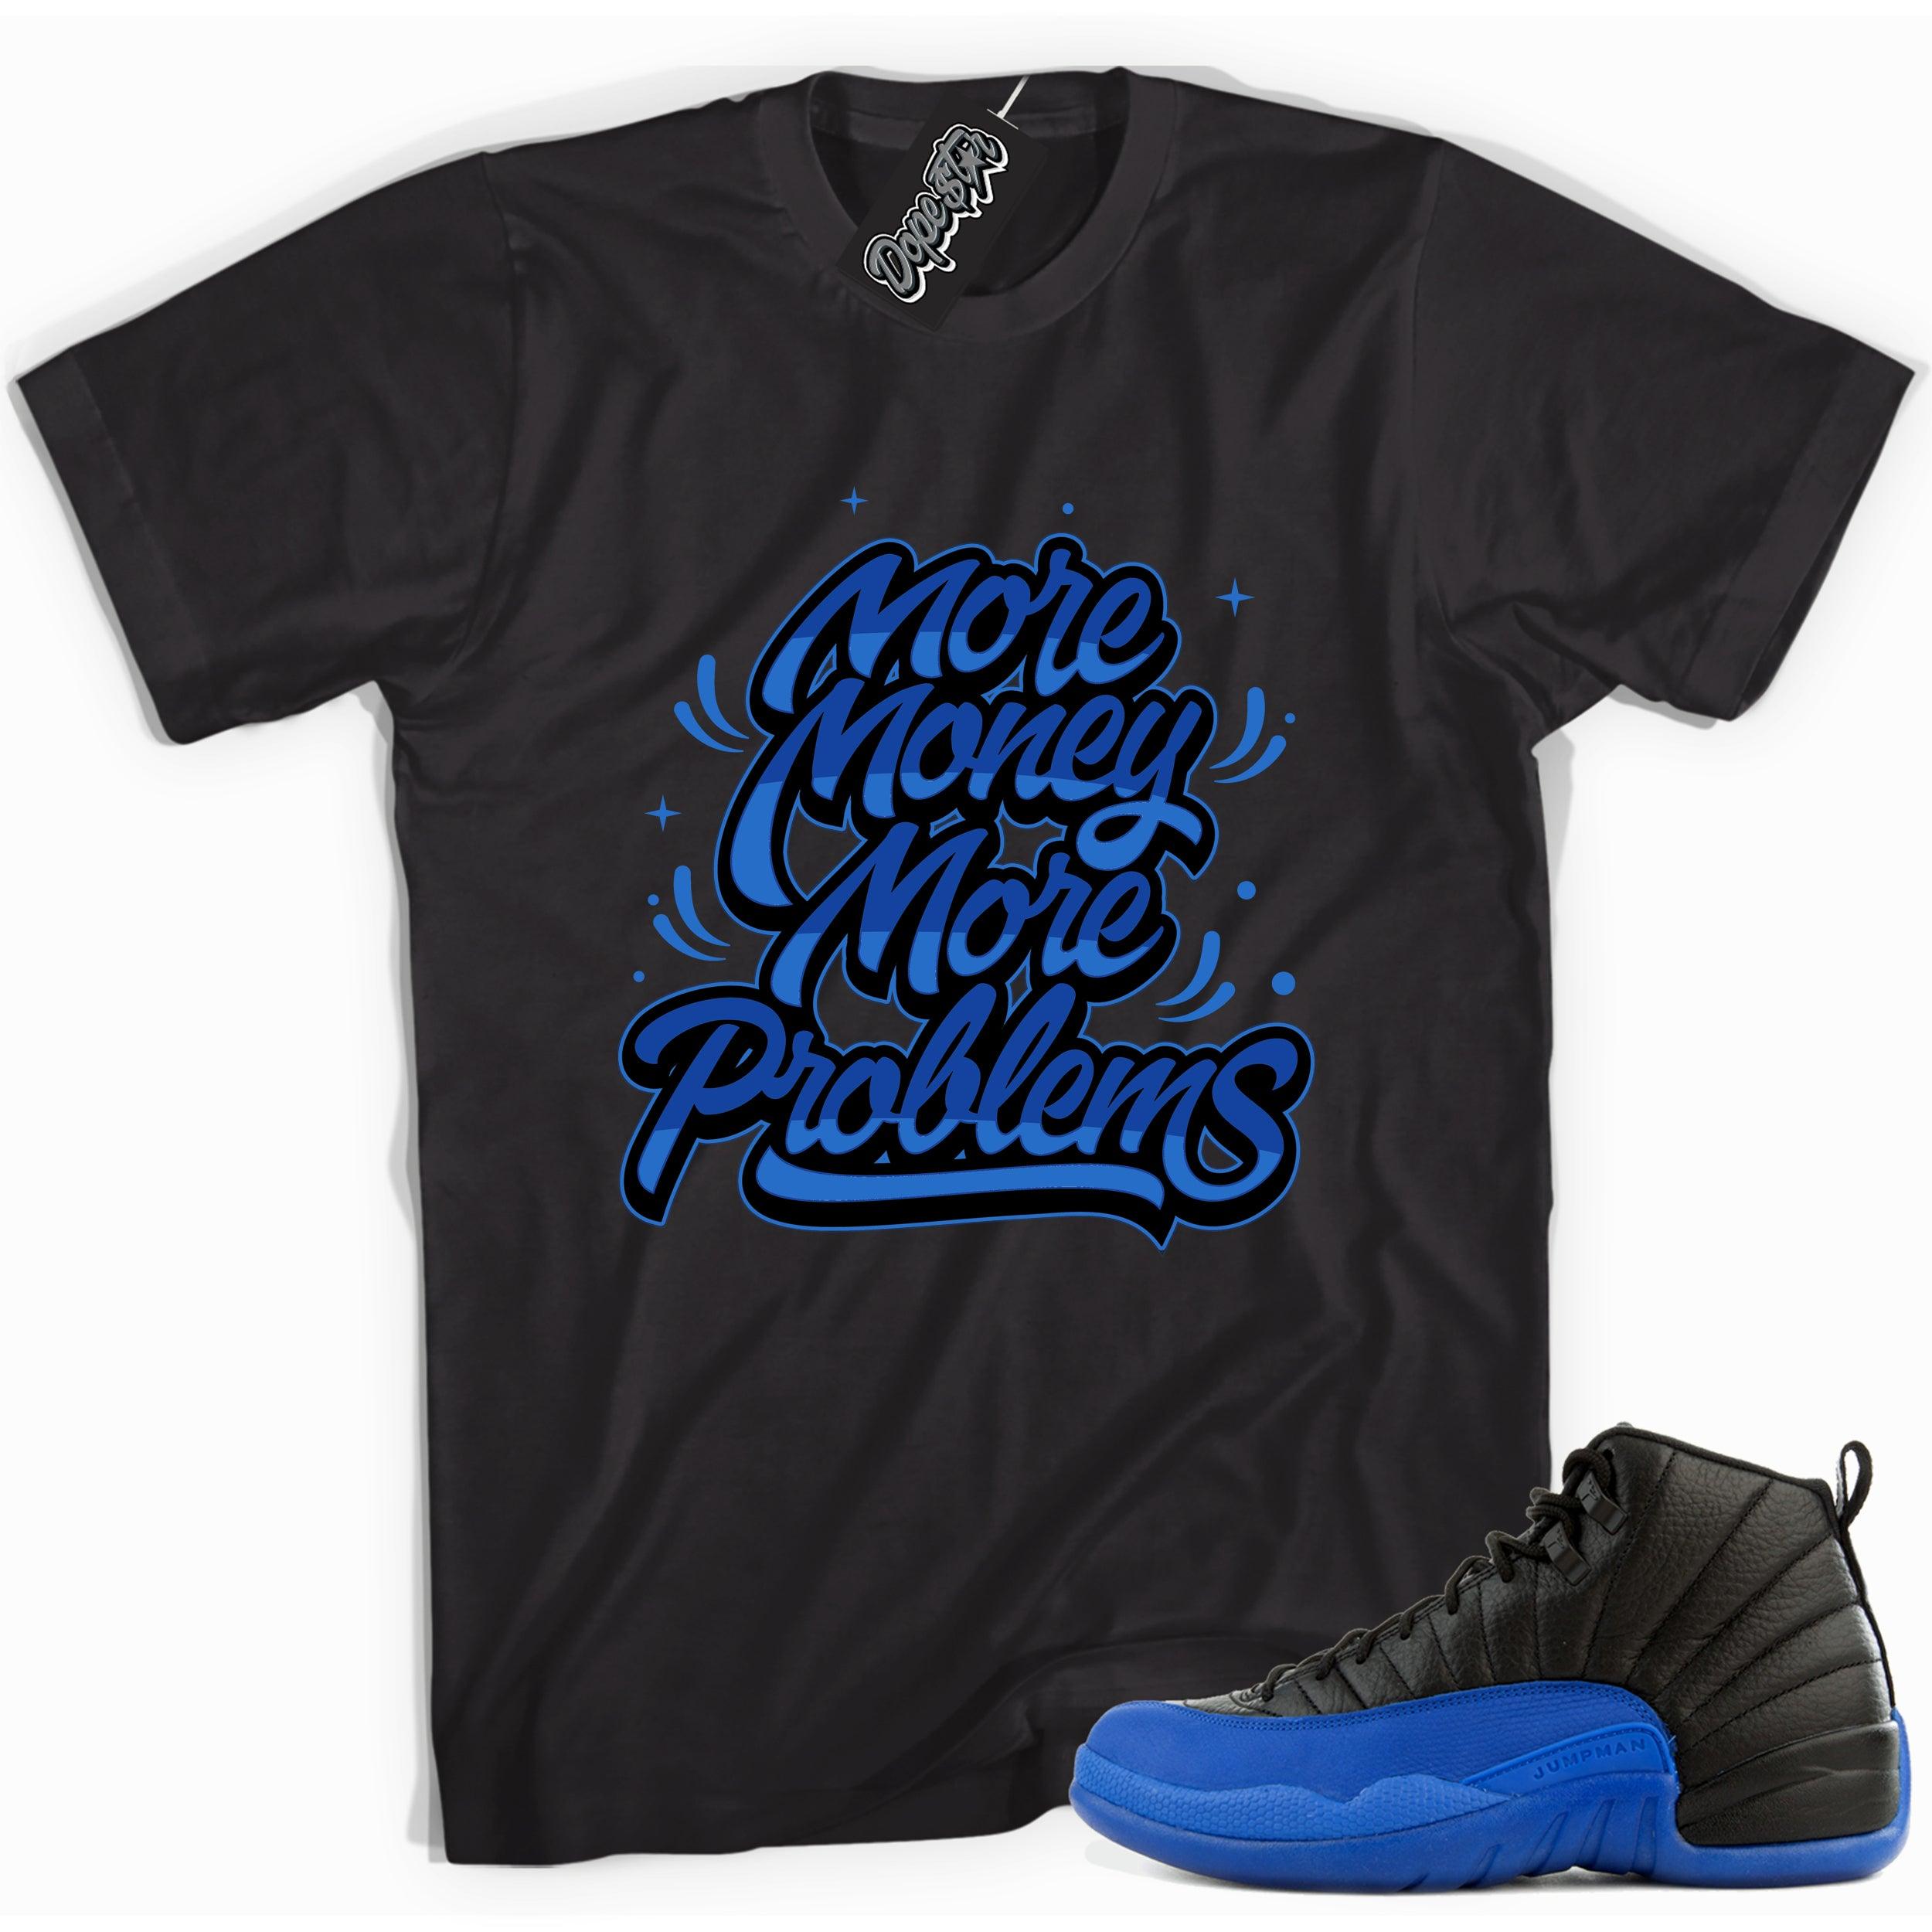 Cool black graphic tee with 'more money more problems' print, that perfectly matches  Air Jordan 12 Retro Black Game Royal sneakers.